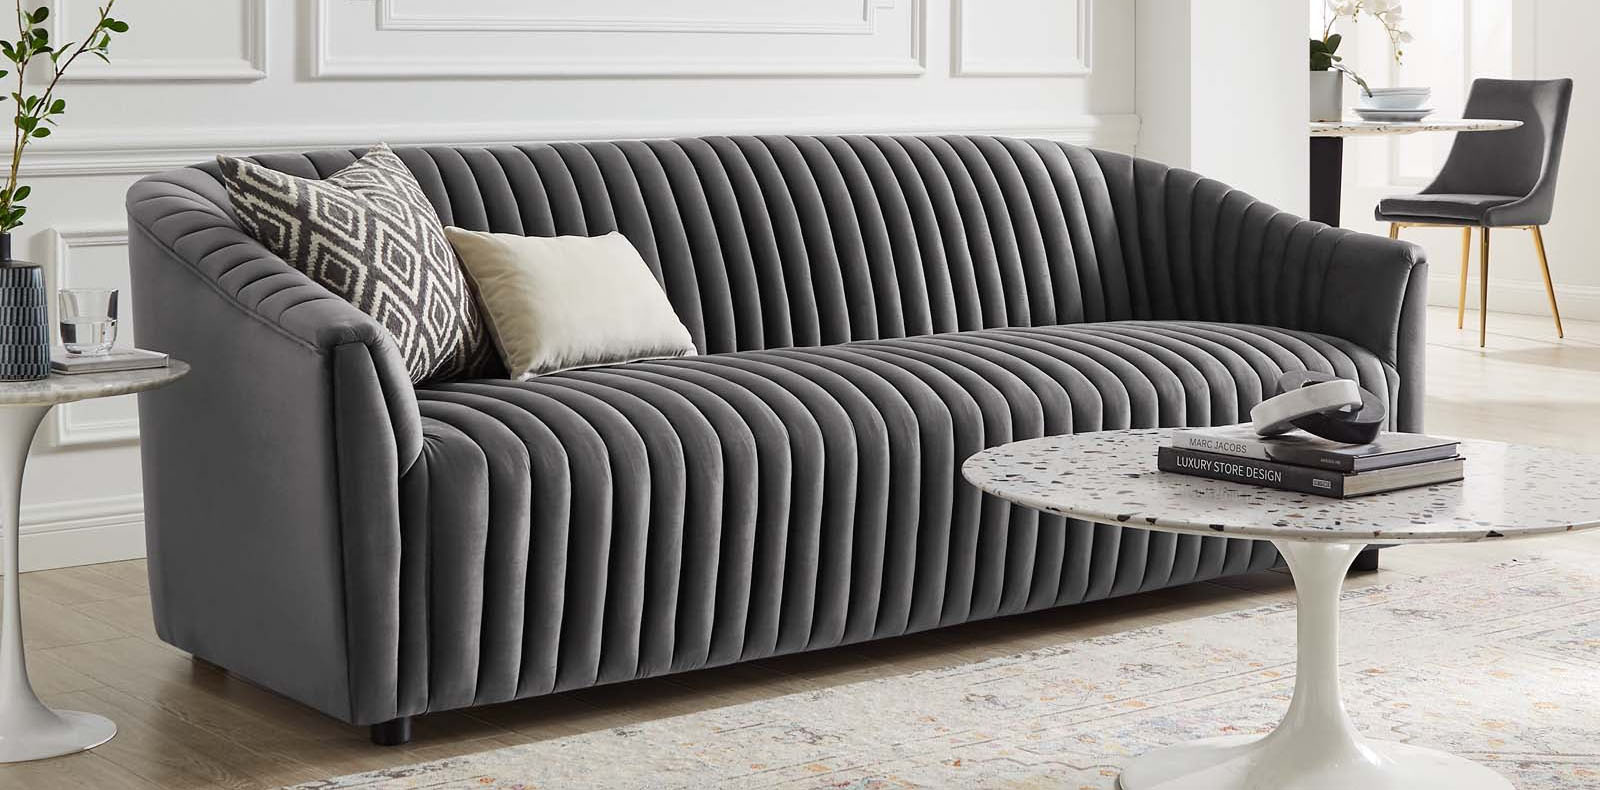 Save on Sofas and Sectionals